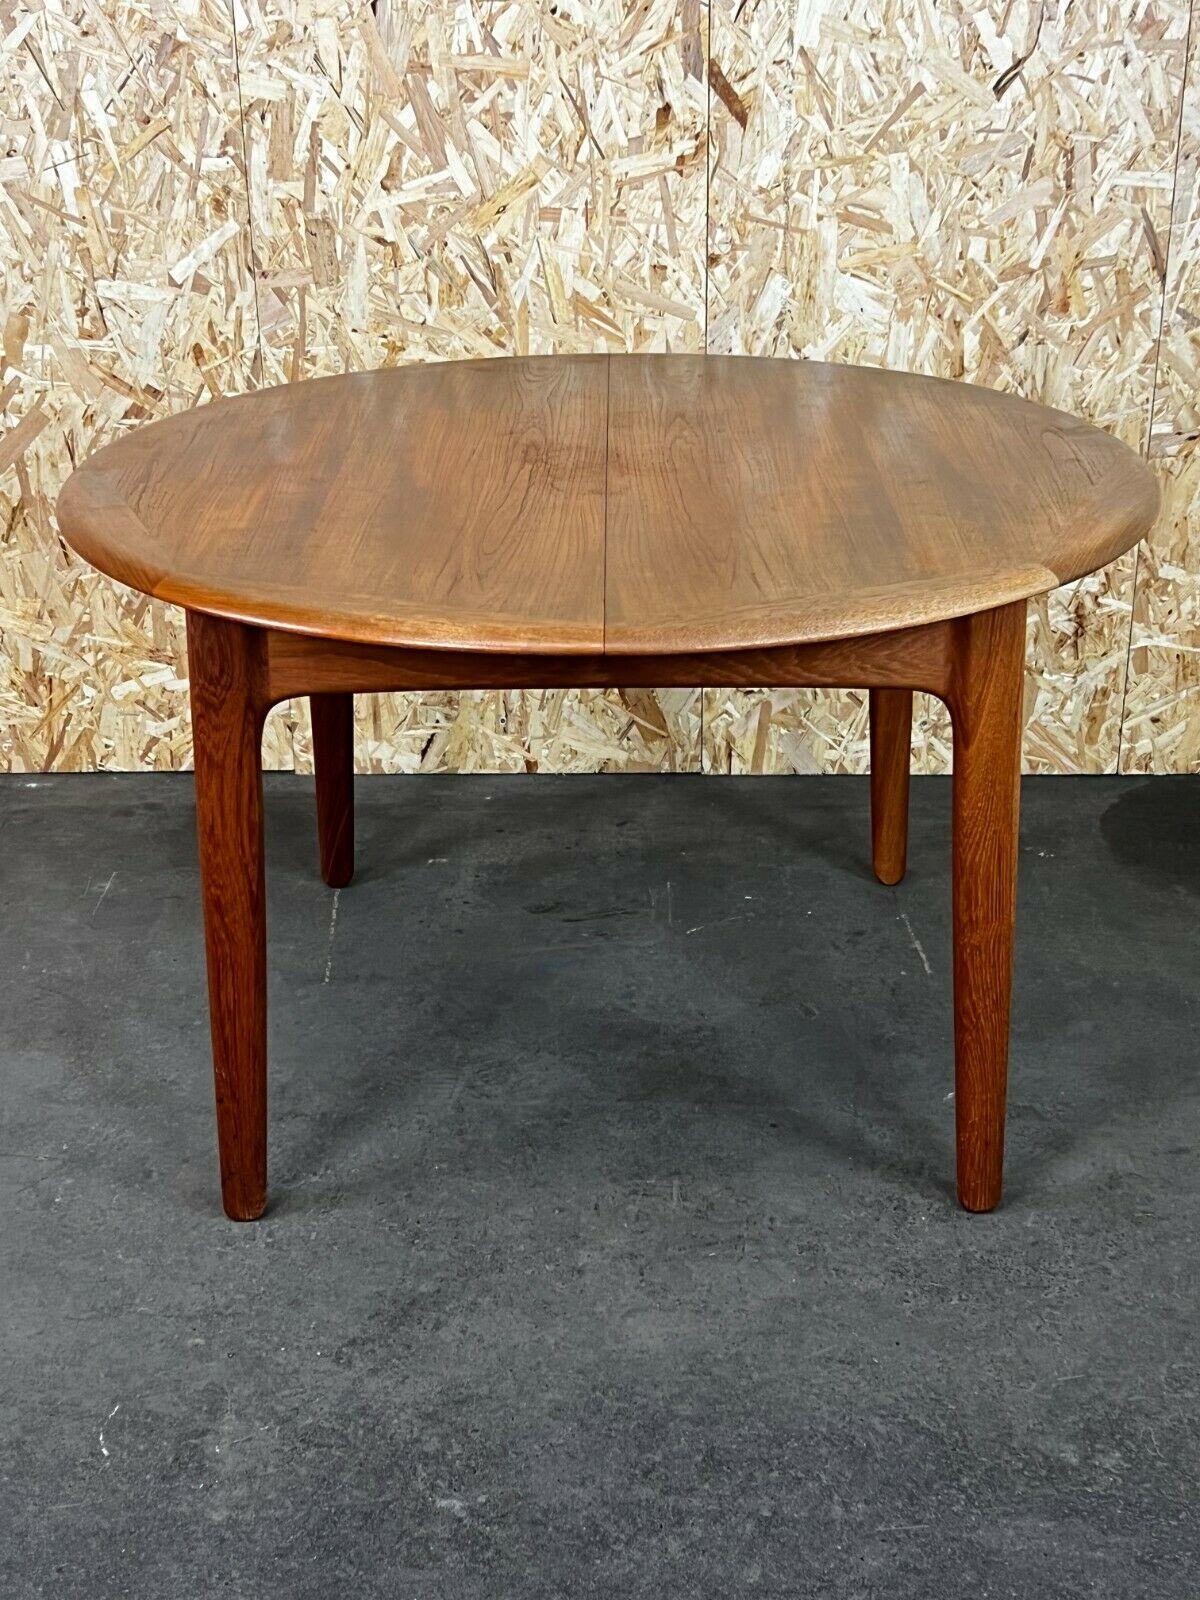 60s 70s teak dining table dining table Svend Aage Madsen for Knudsen & Son

Object: dining table / dining table

Manufacturer: Knudsen & Son

Condition: good - vintage

Age: around 1960-1970

Dimensions:

174cm (115cm) x 115cm x